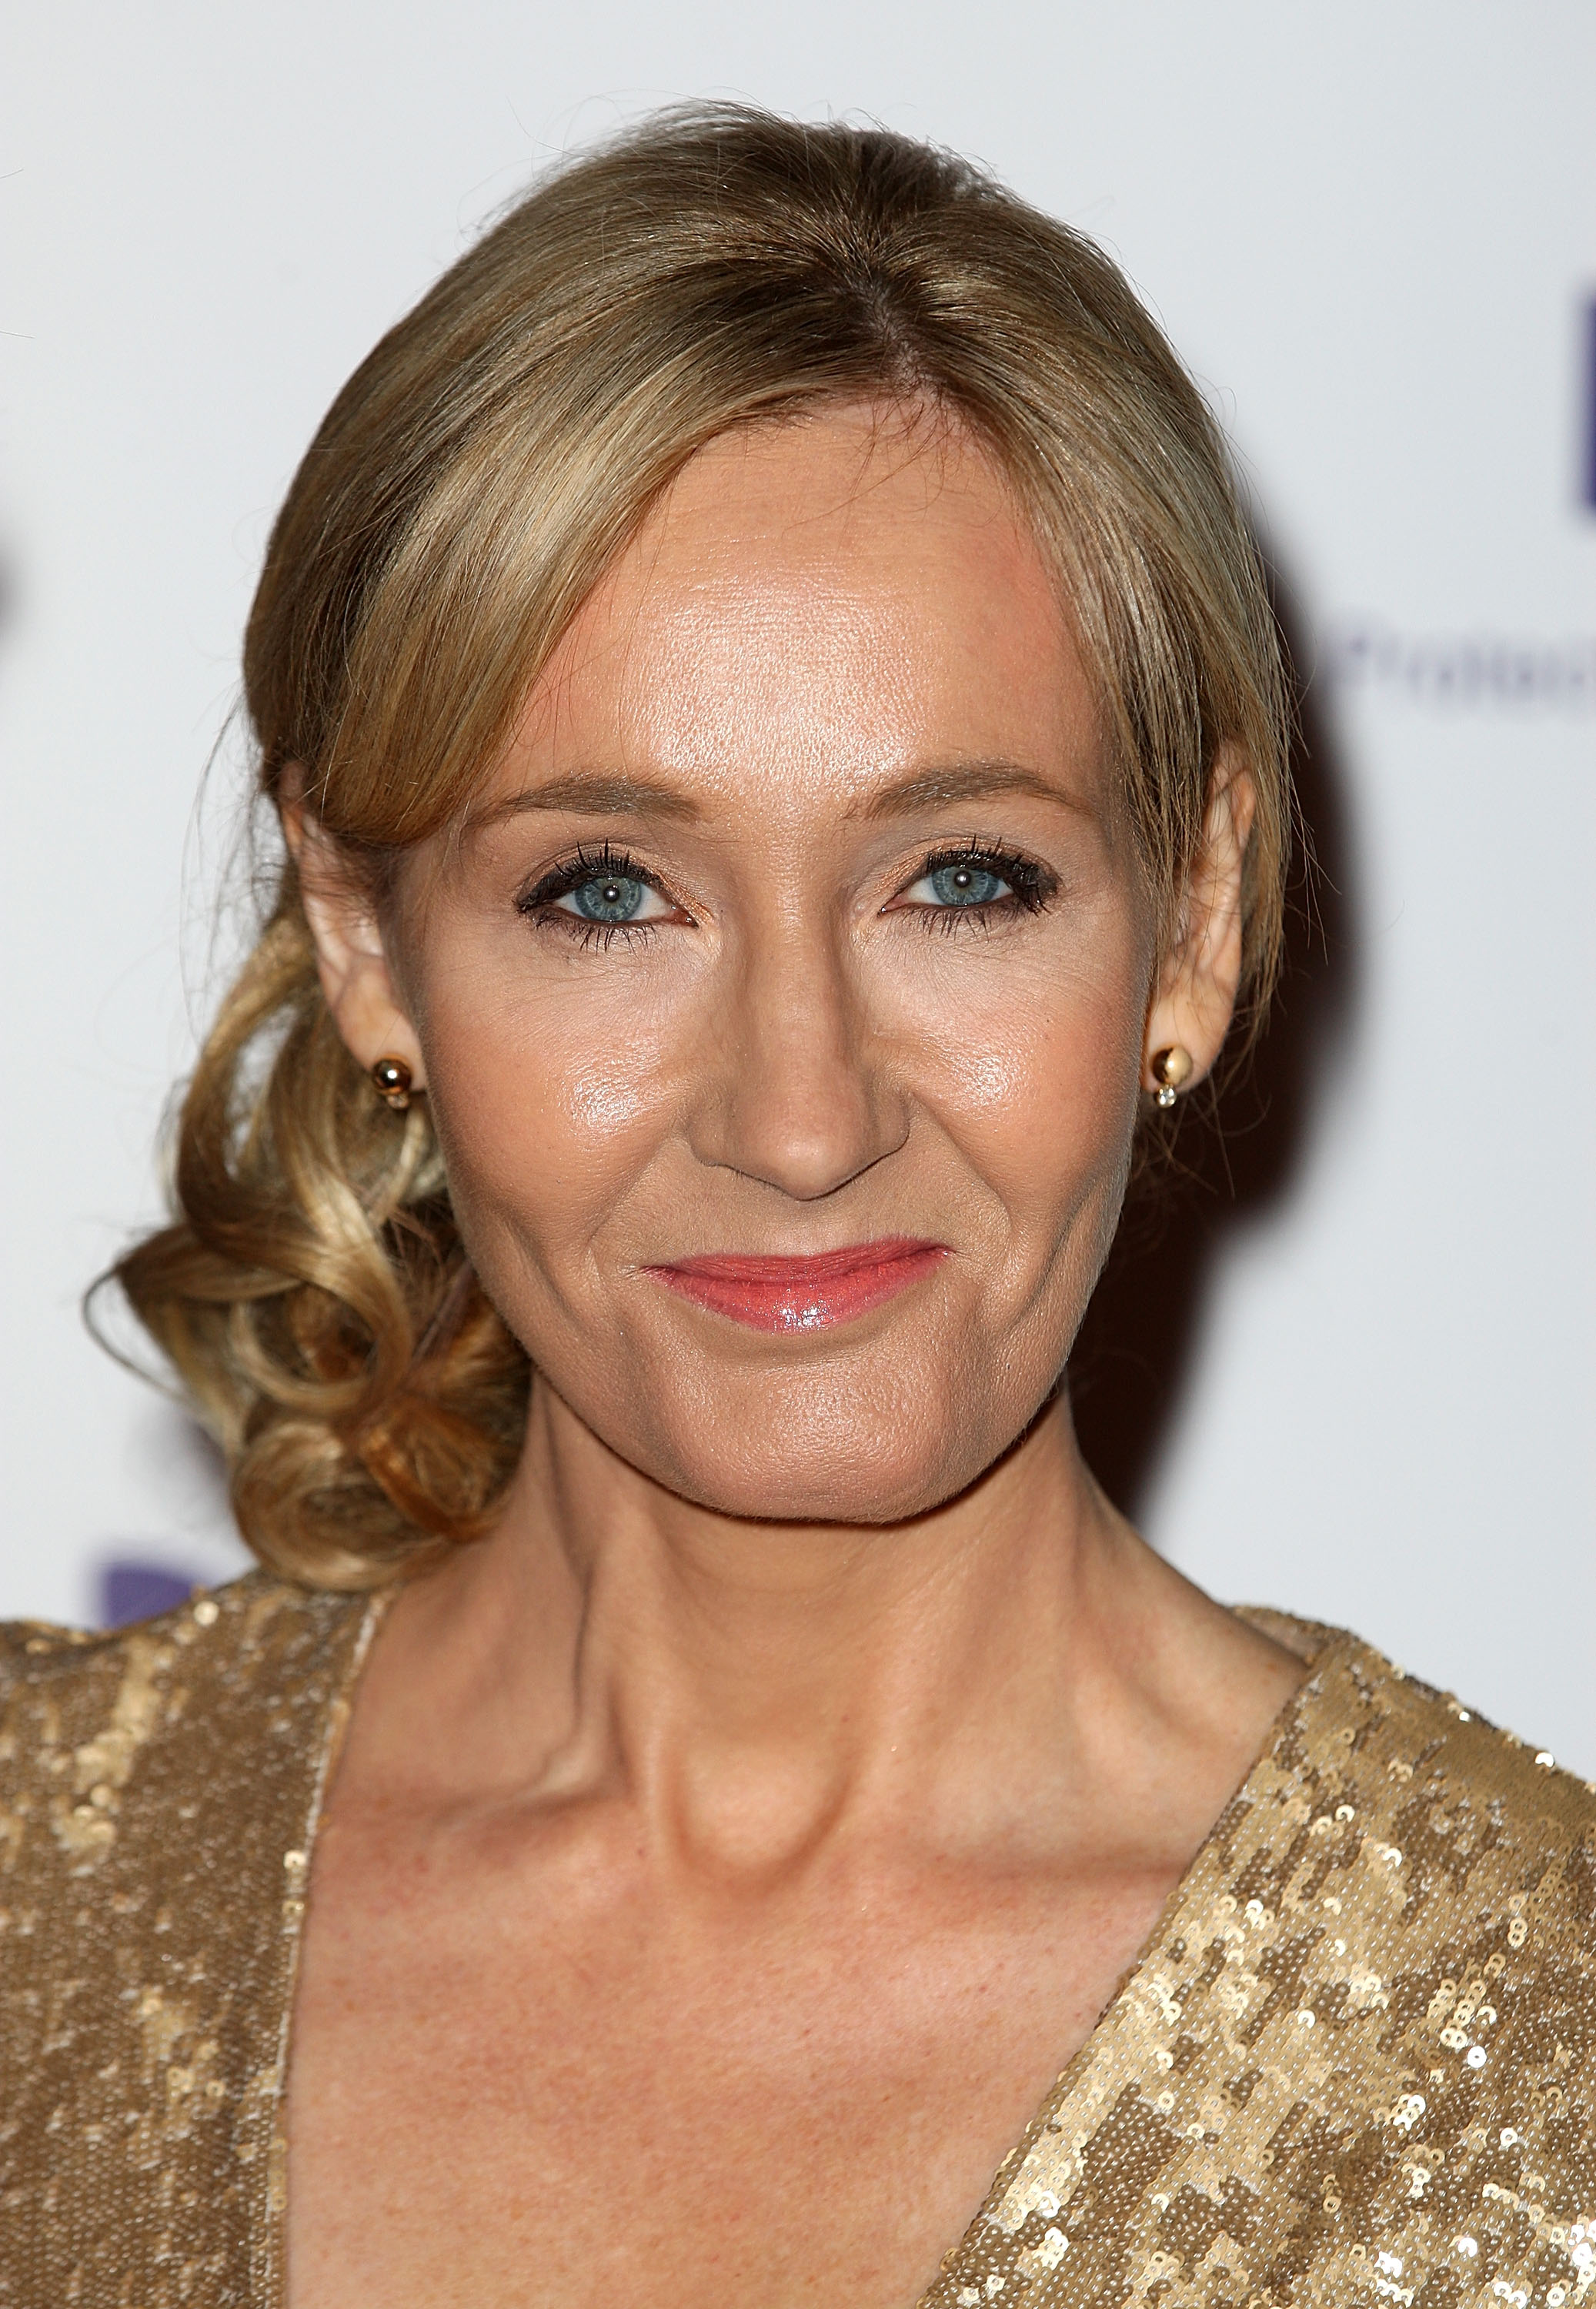 J.K. Rowling at a charity event at Warner Bros Studios in London in 2013.